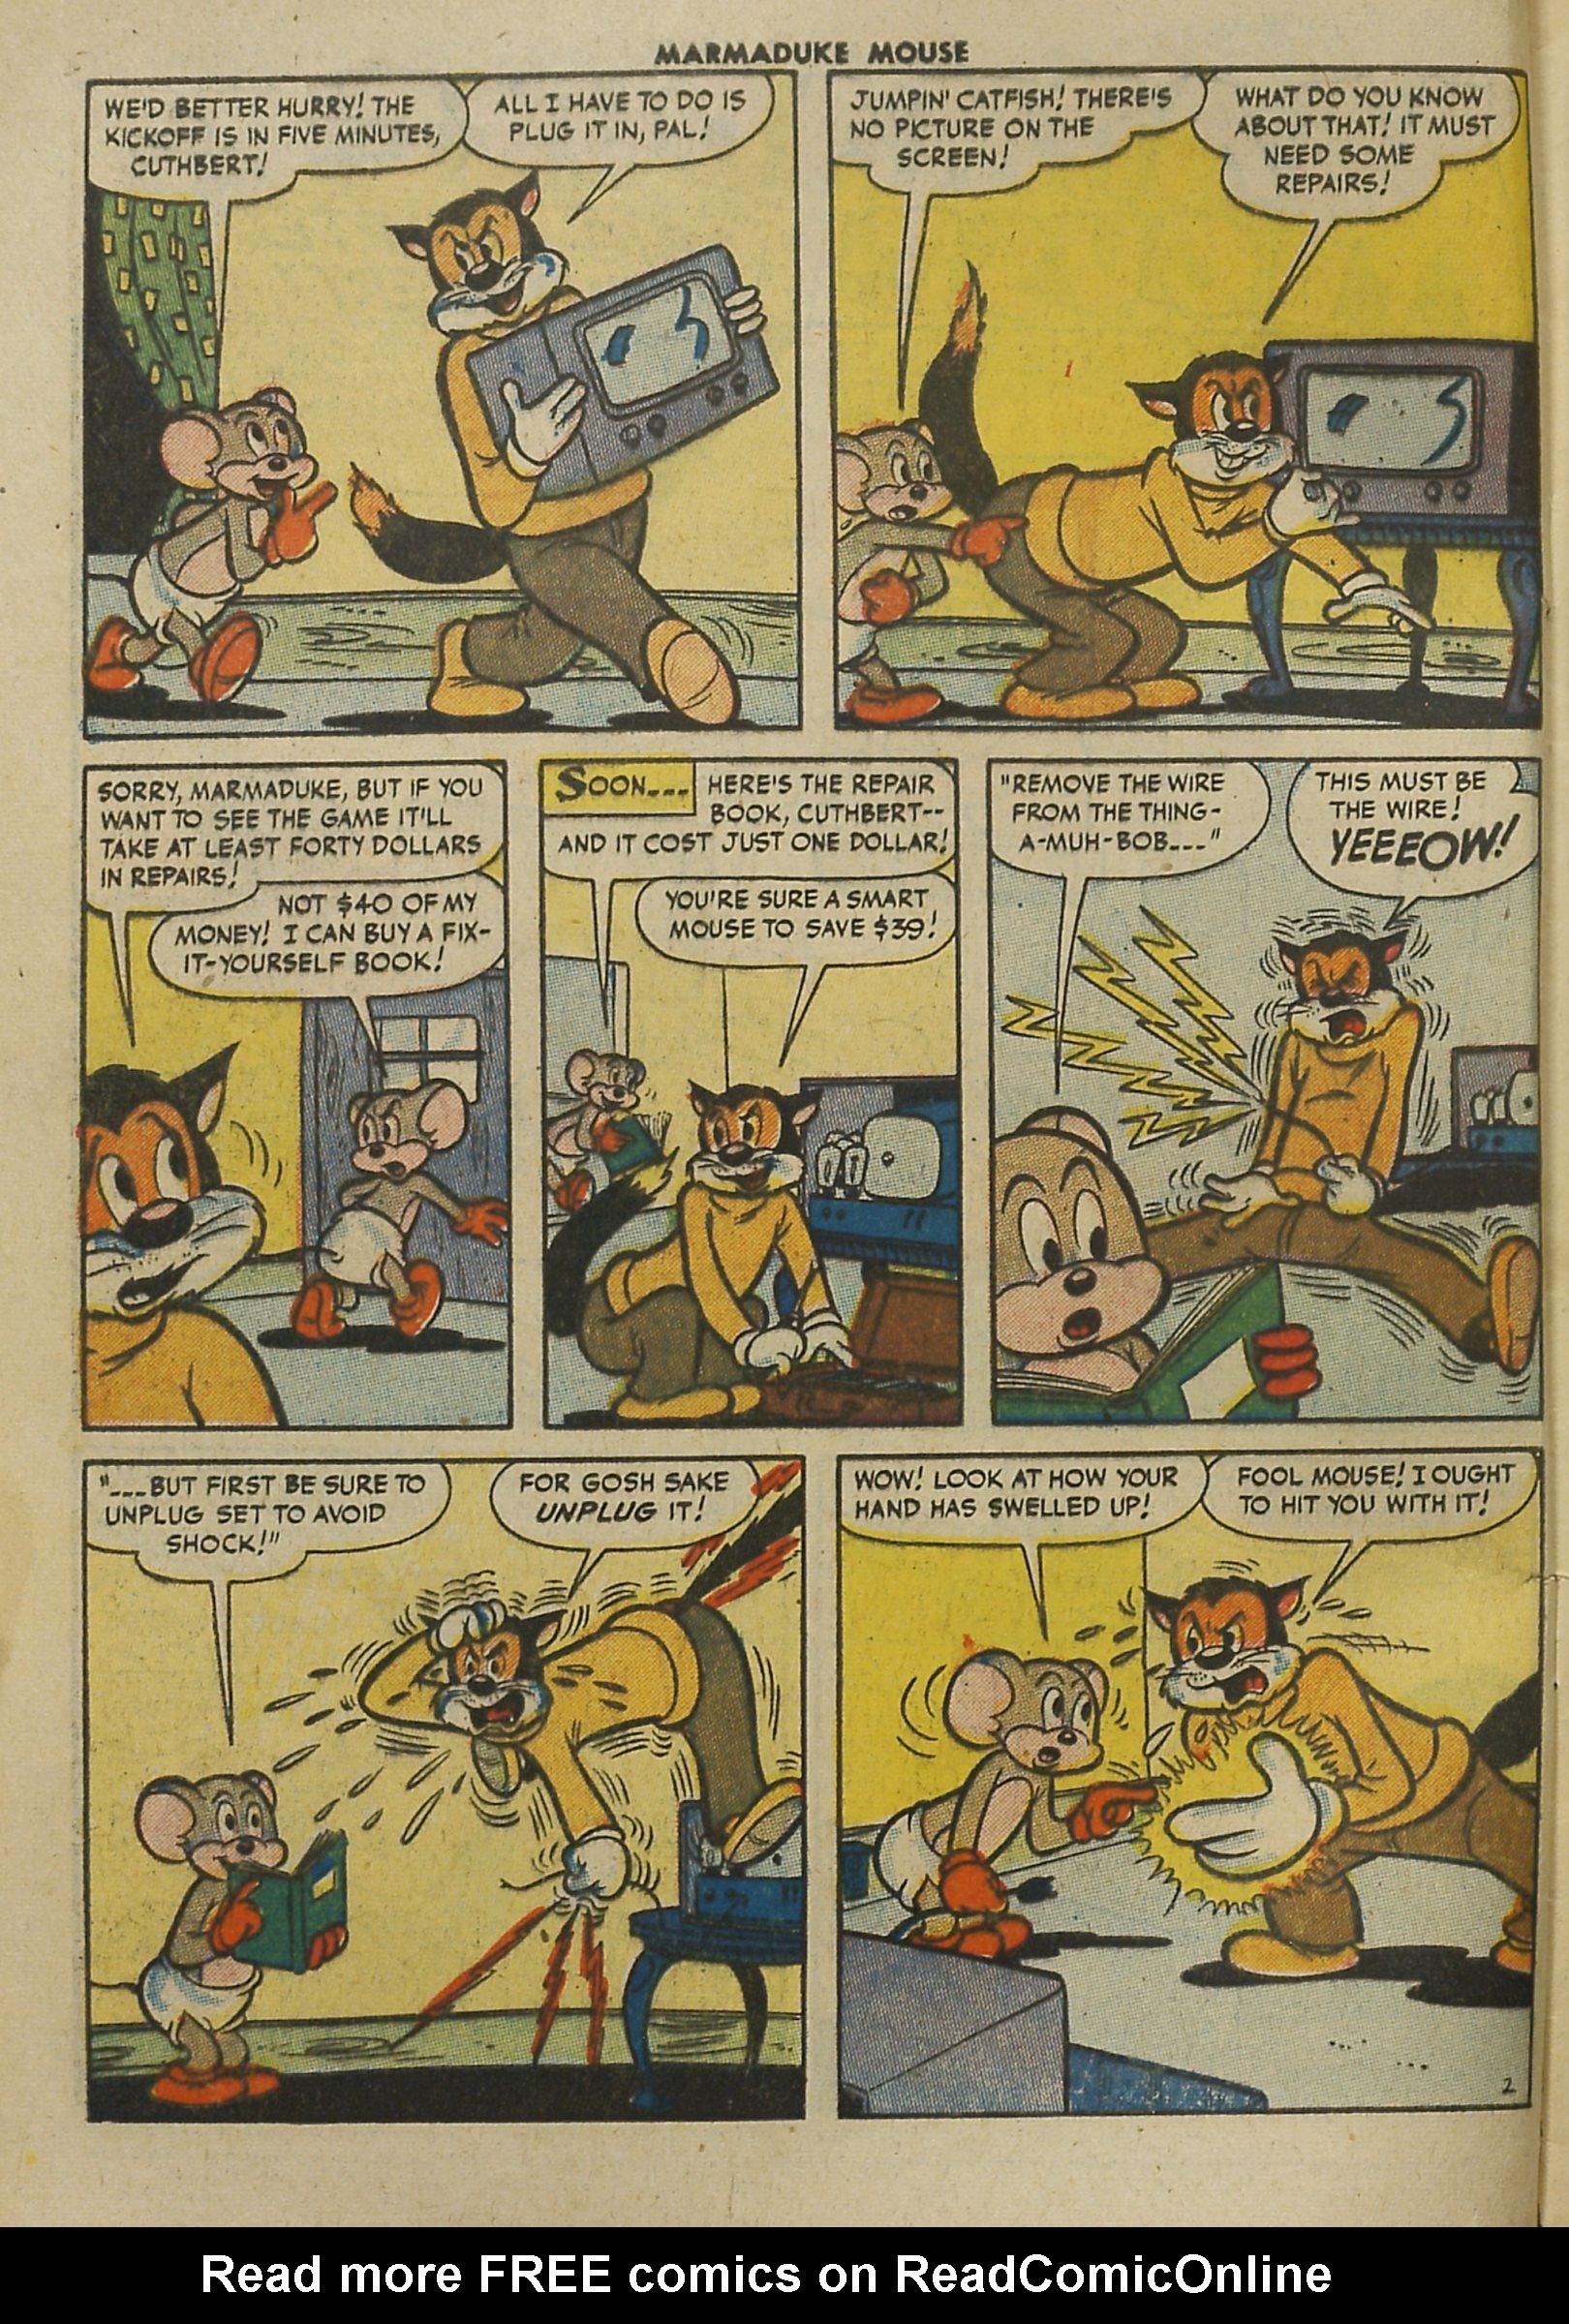 Read online Marmaduke Mouse comic -  Issue #45 - 4